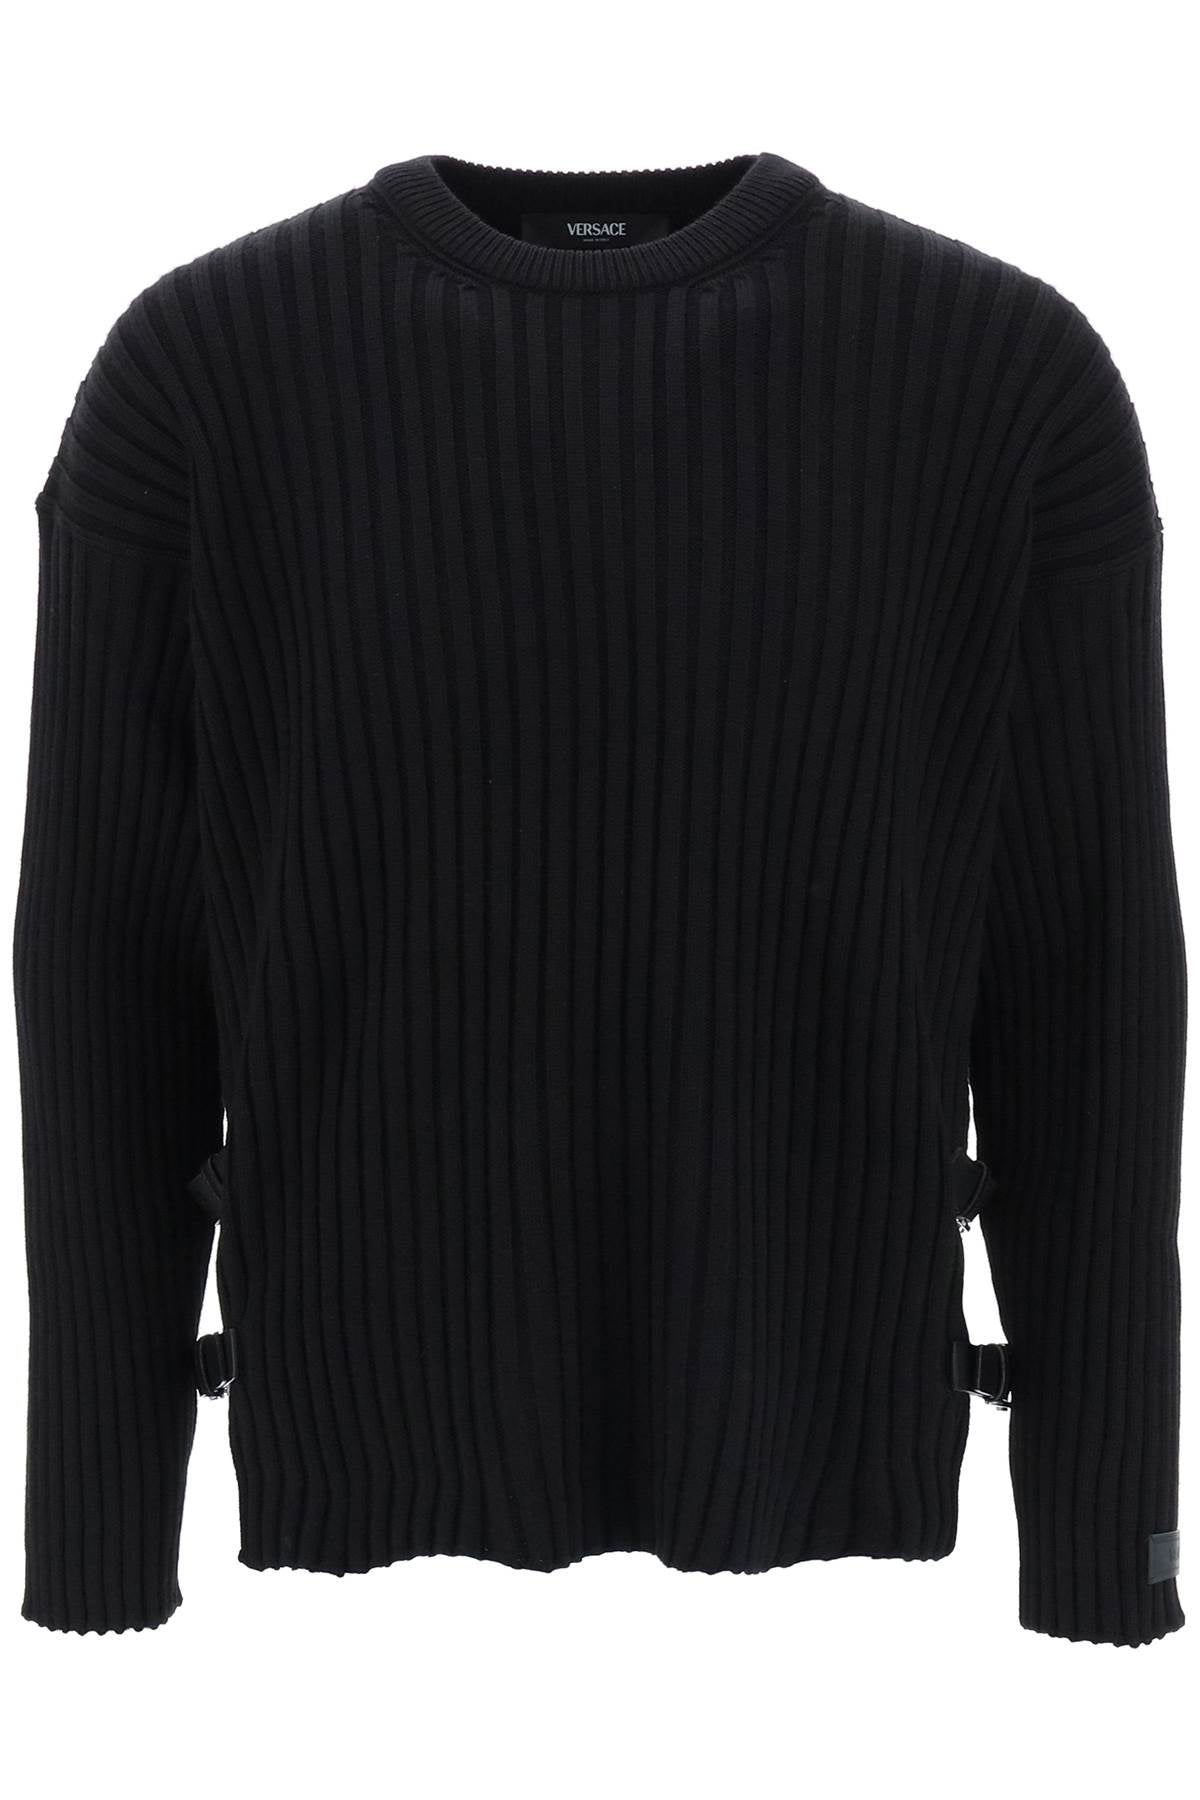 Versace ribbed-knit sweater with leather straps-0